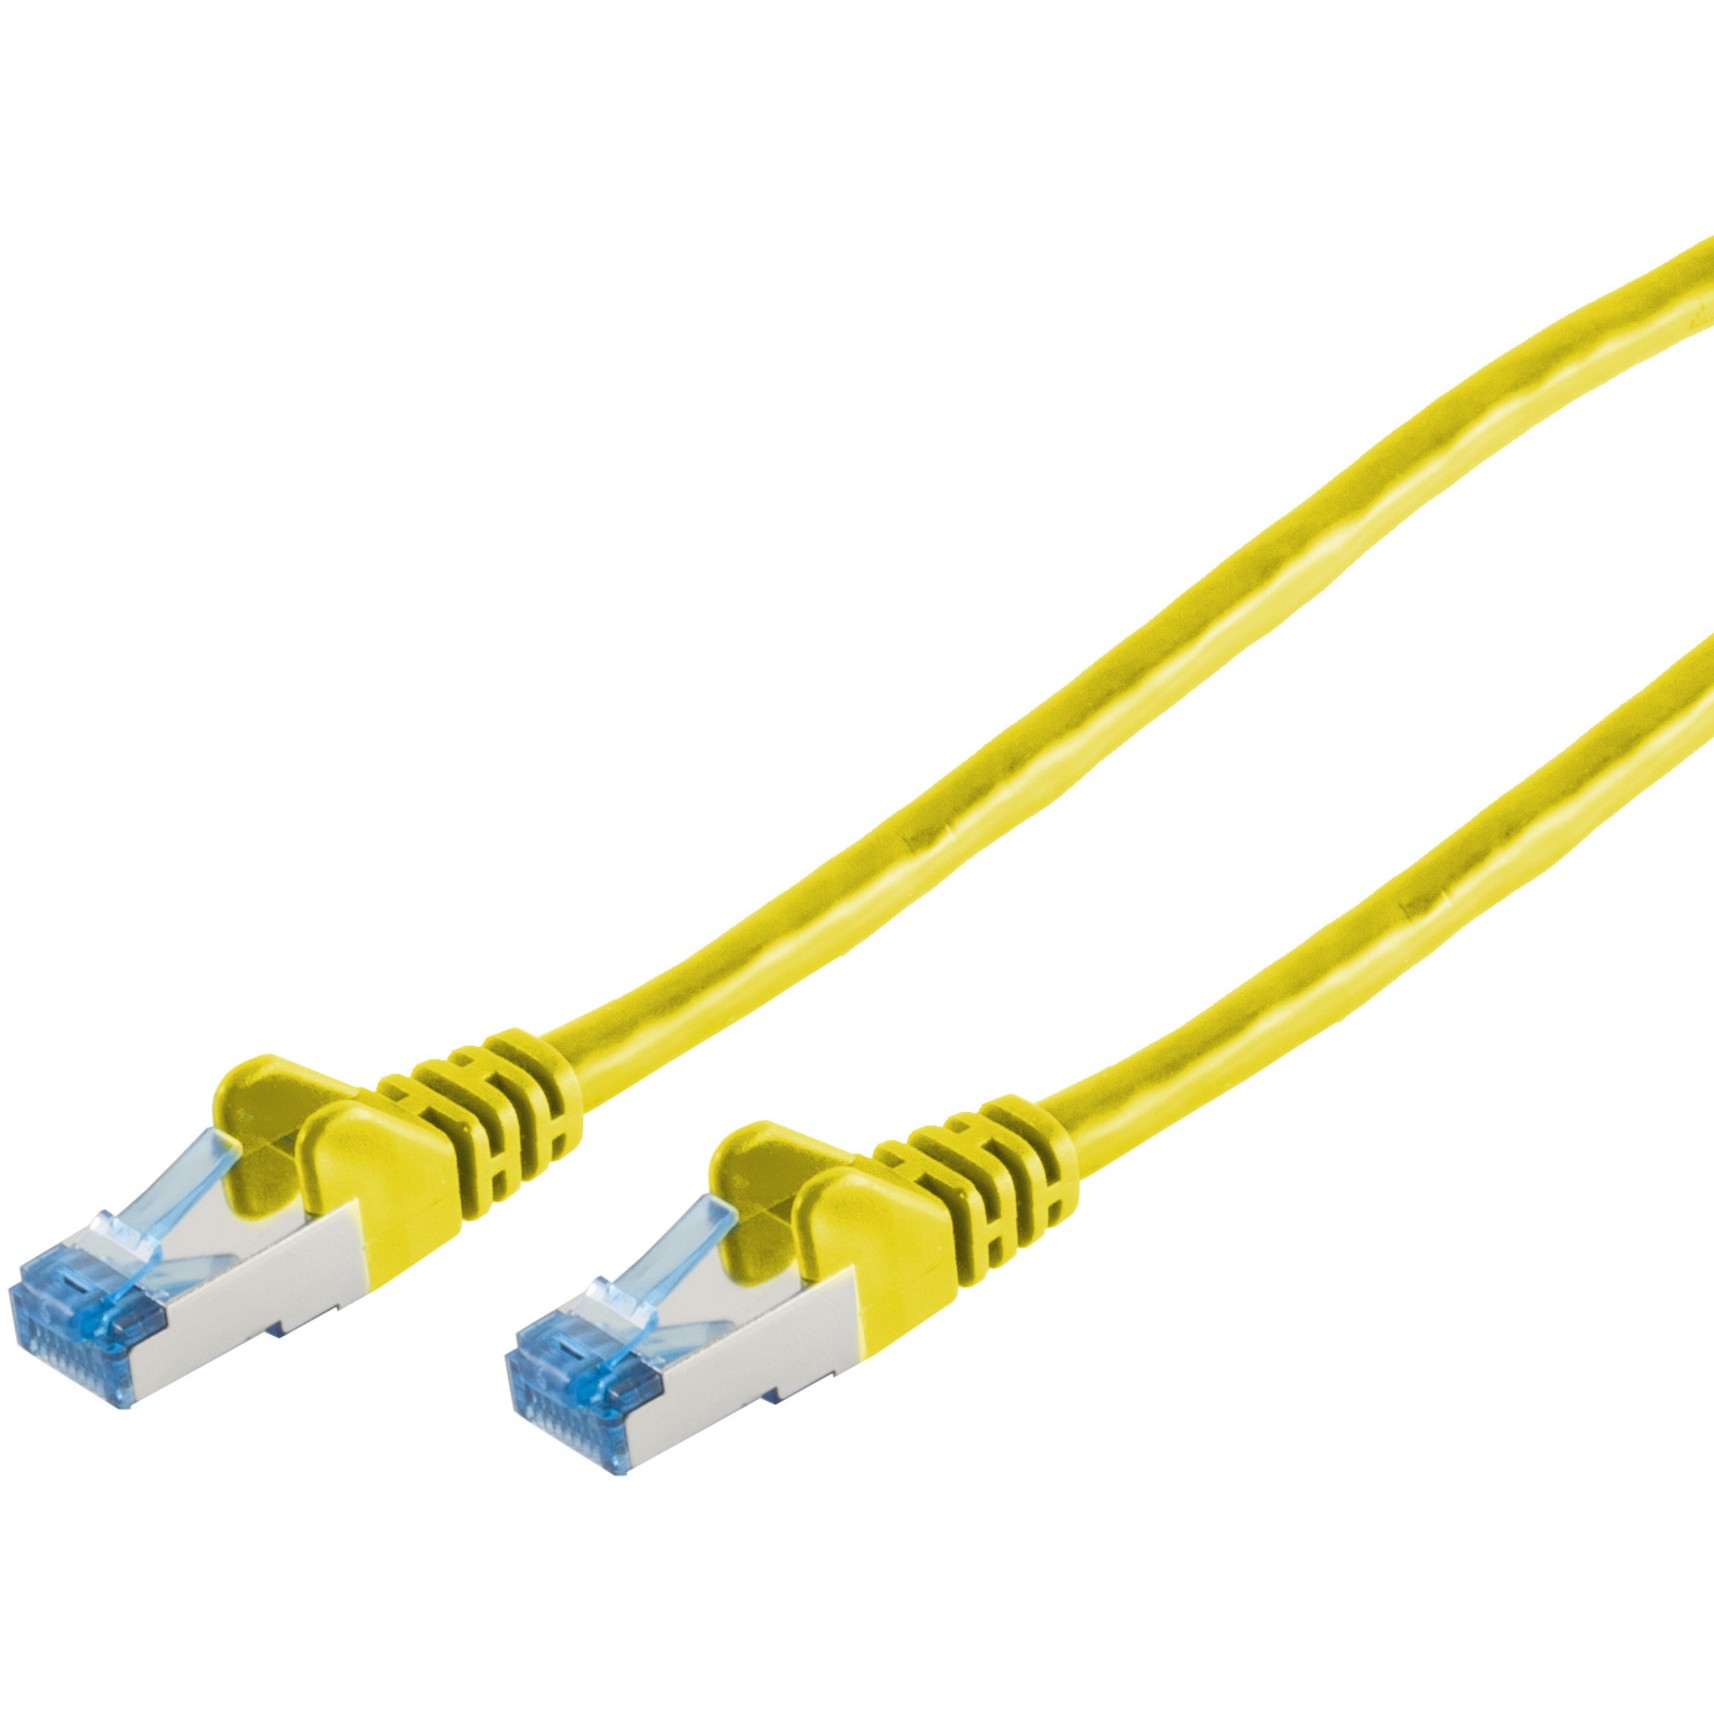 S-Conn 75711-0.5Y networking cable - 75711-0.5Y